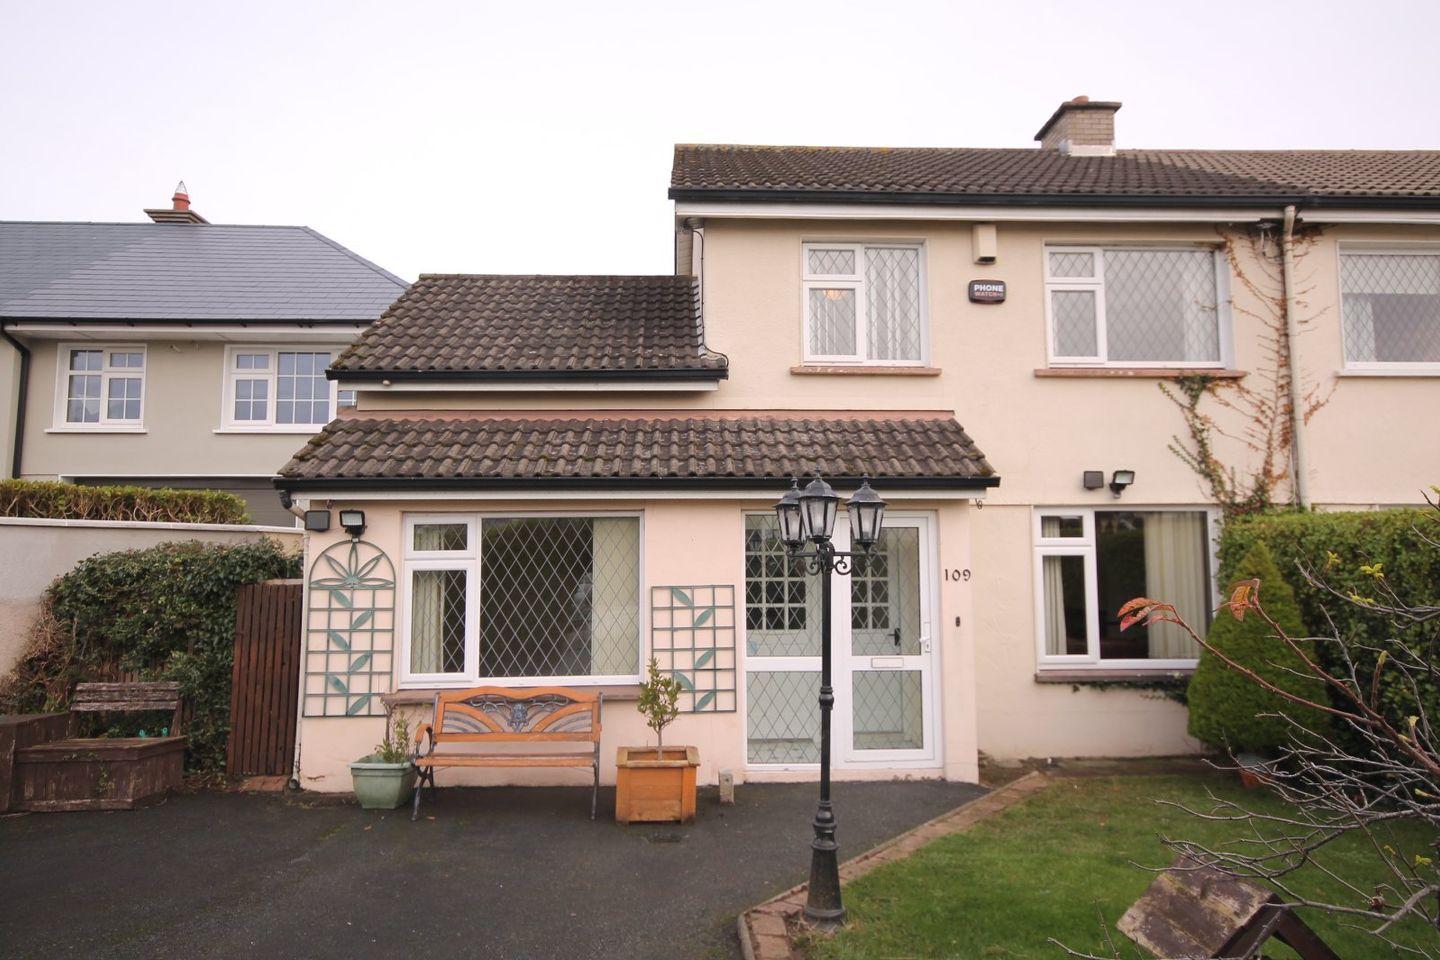 109 Mountainview Drive, Bray, Co. Wicklow, A98DP28